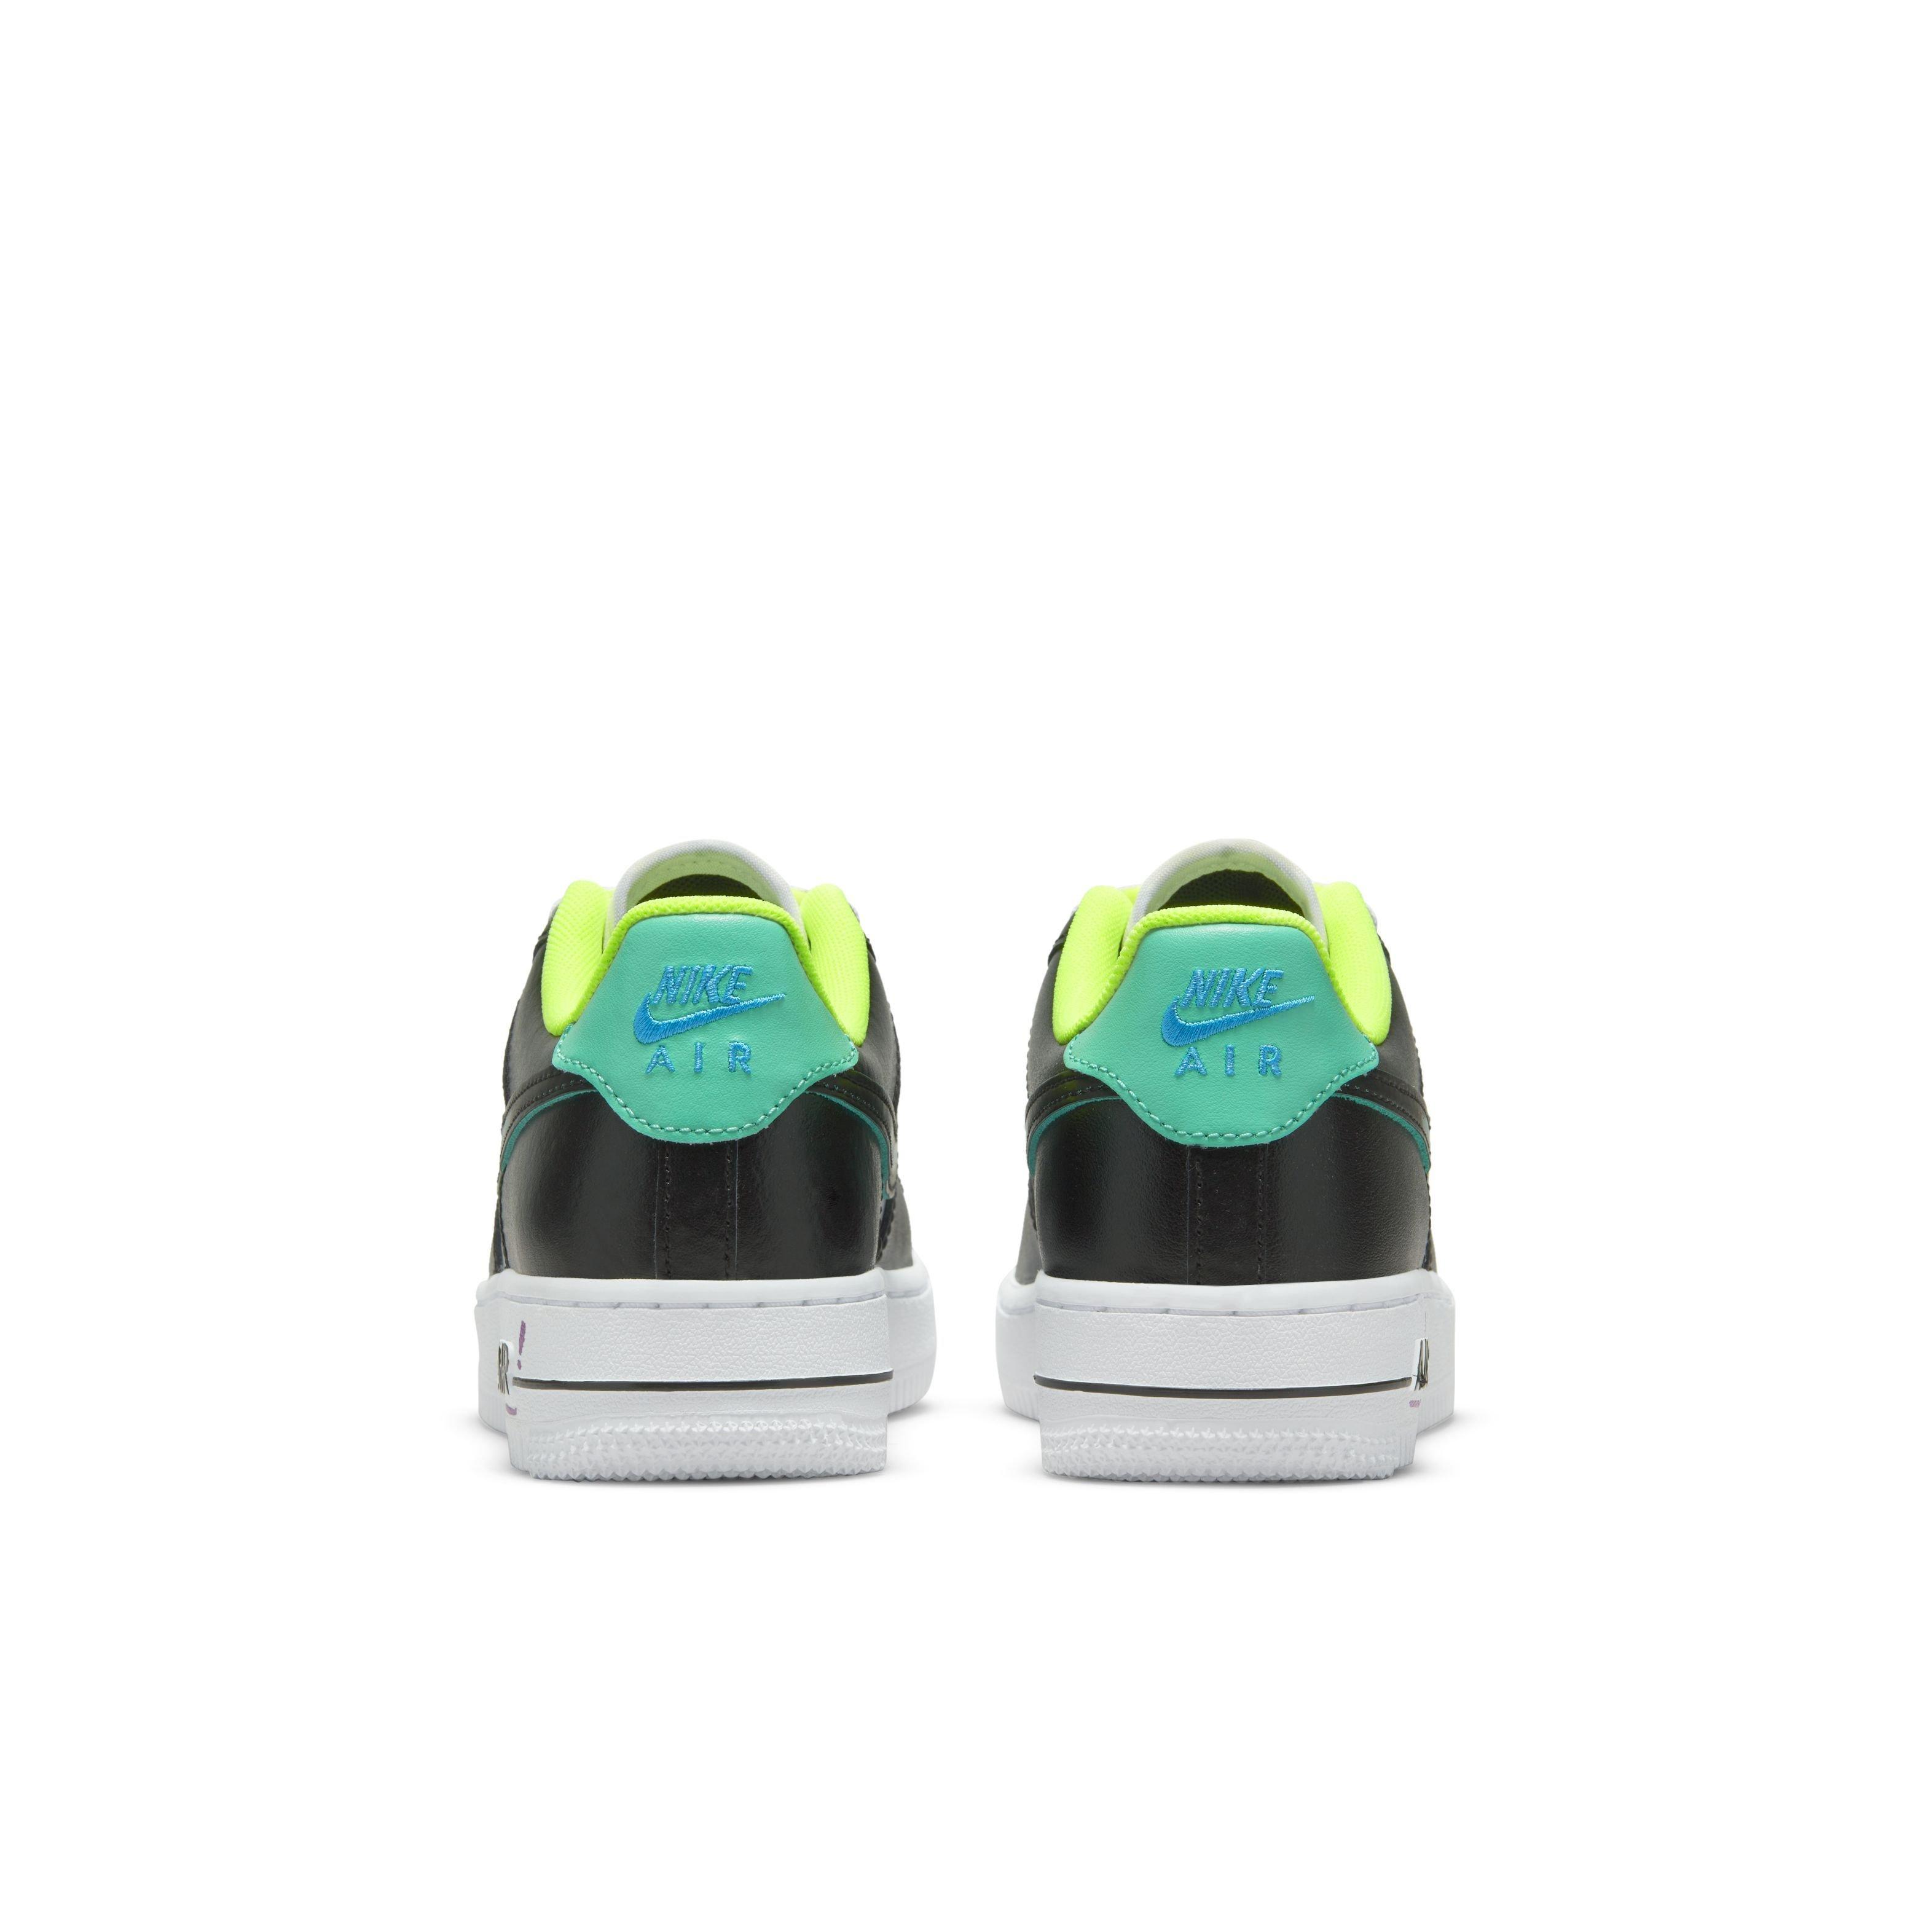 Nike Air Force 1 VOLT Neon Yellow LV8 UV TD, Size 9c